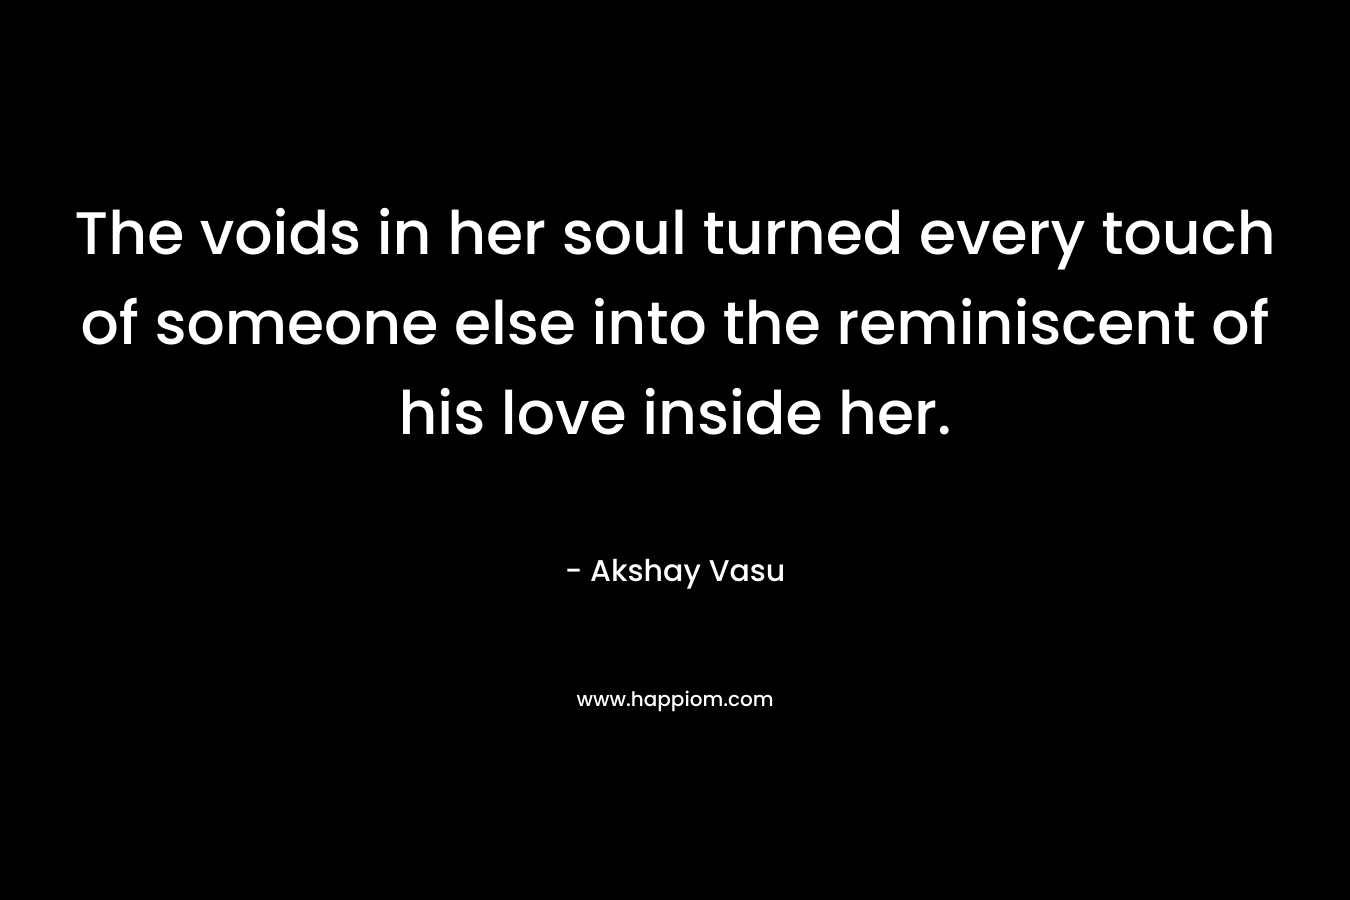 The voids in her soul turned every touch of someone else into the reminiscent of his love inside her.